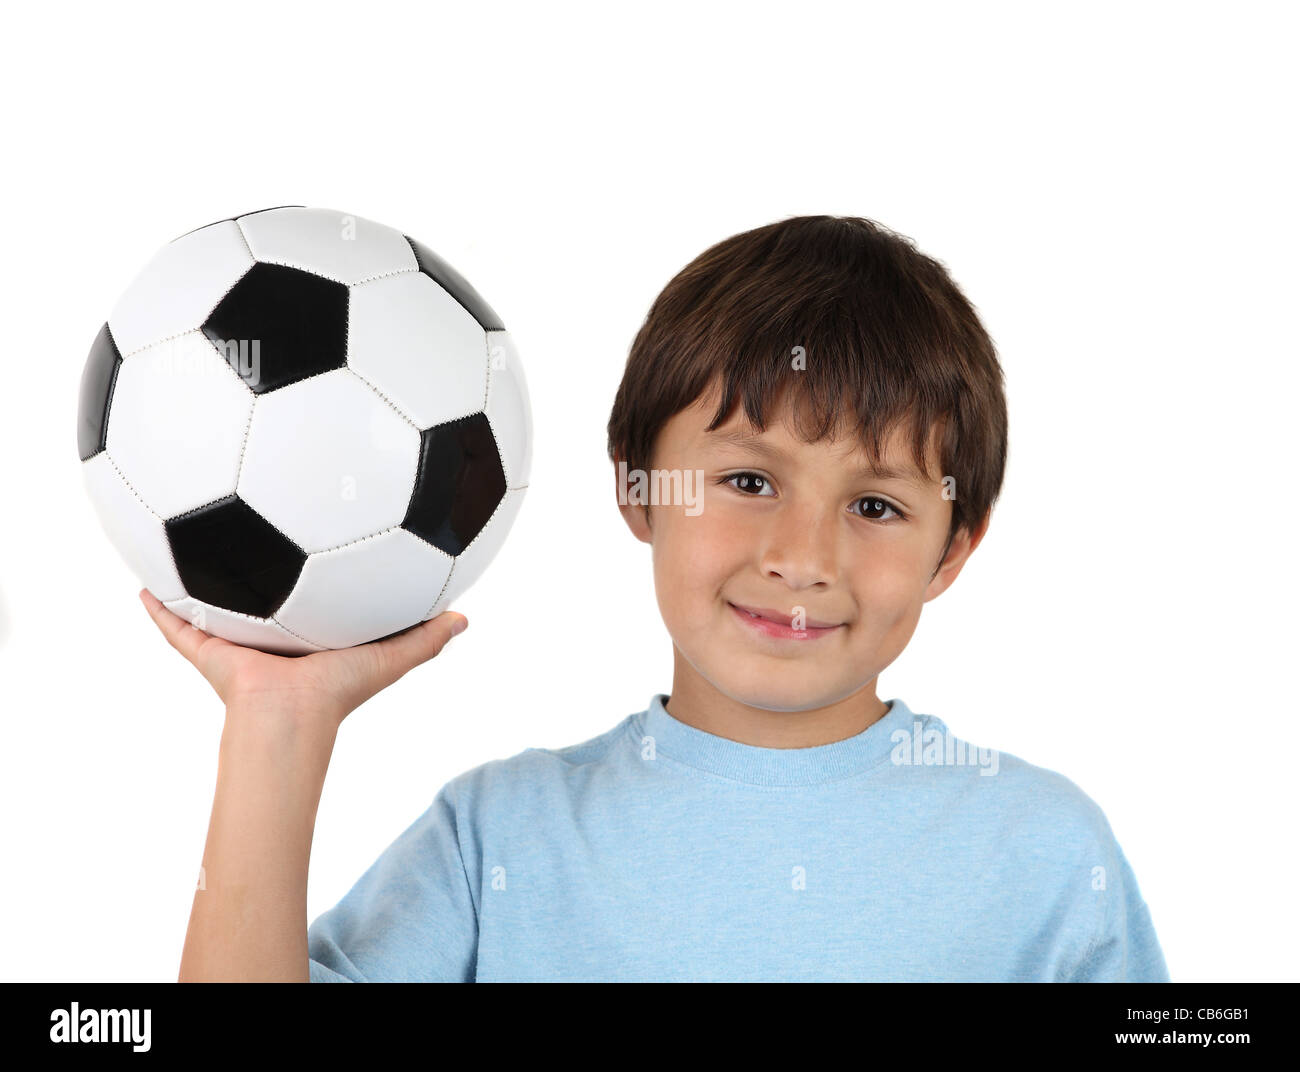 Young happy boy holding up soccer ball on white background Stock Photo